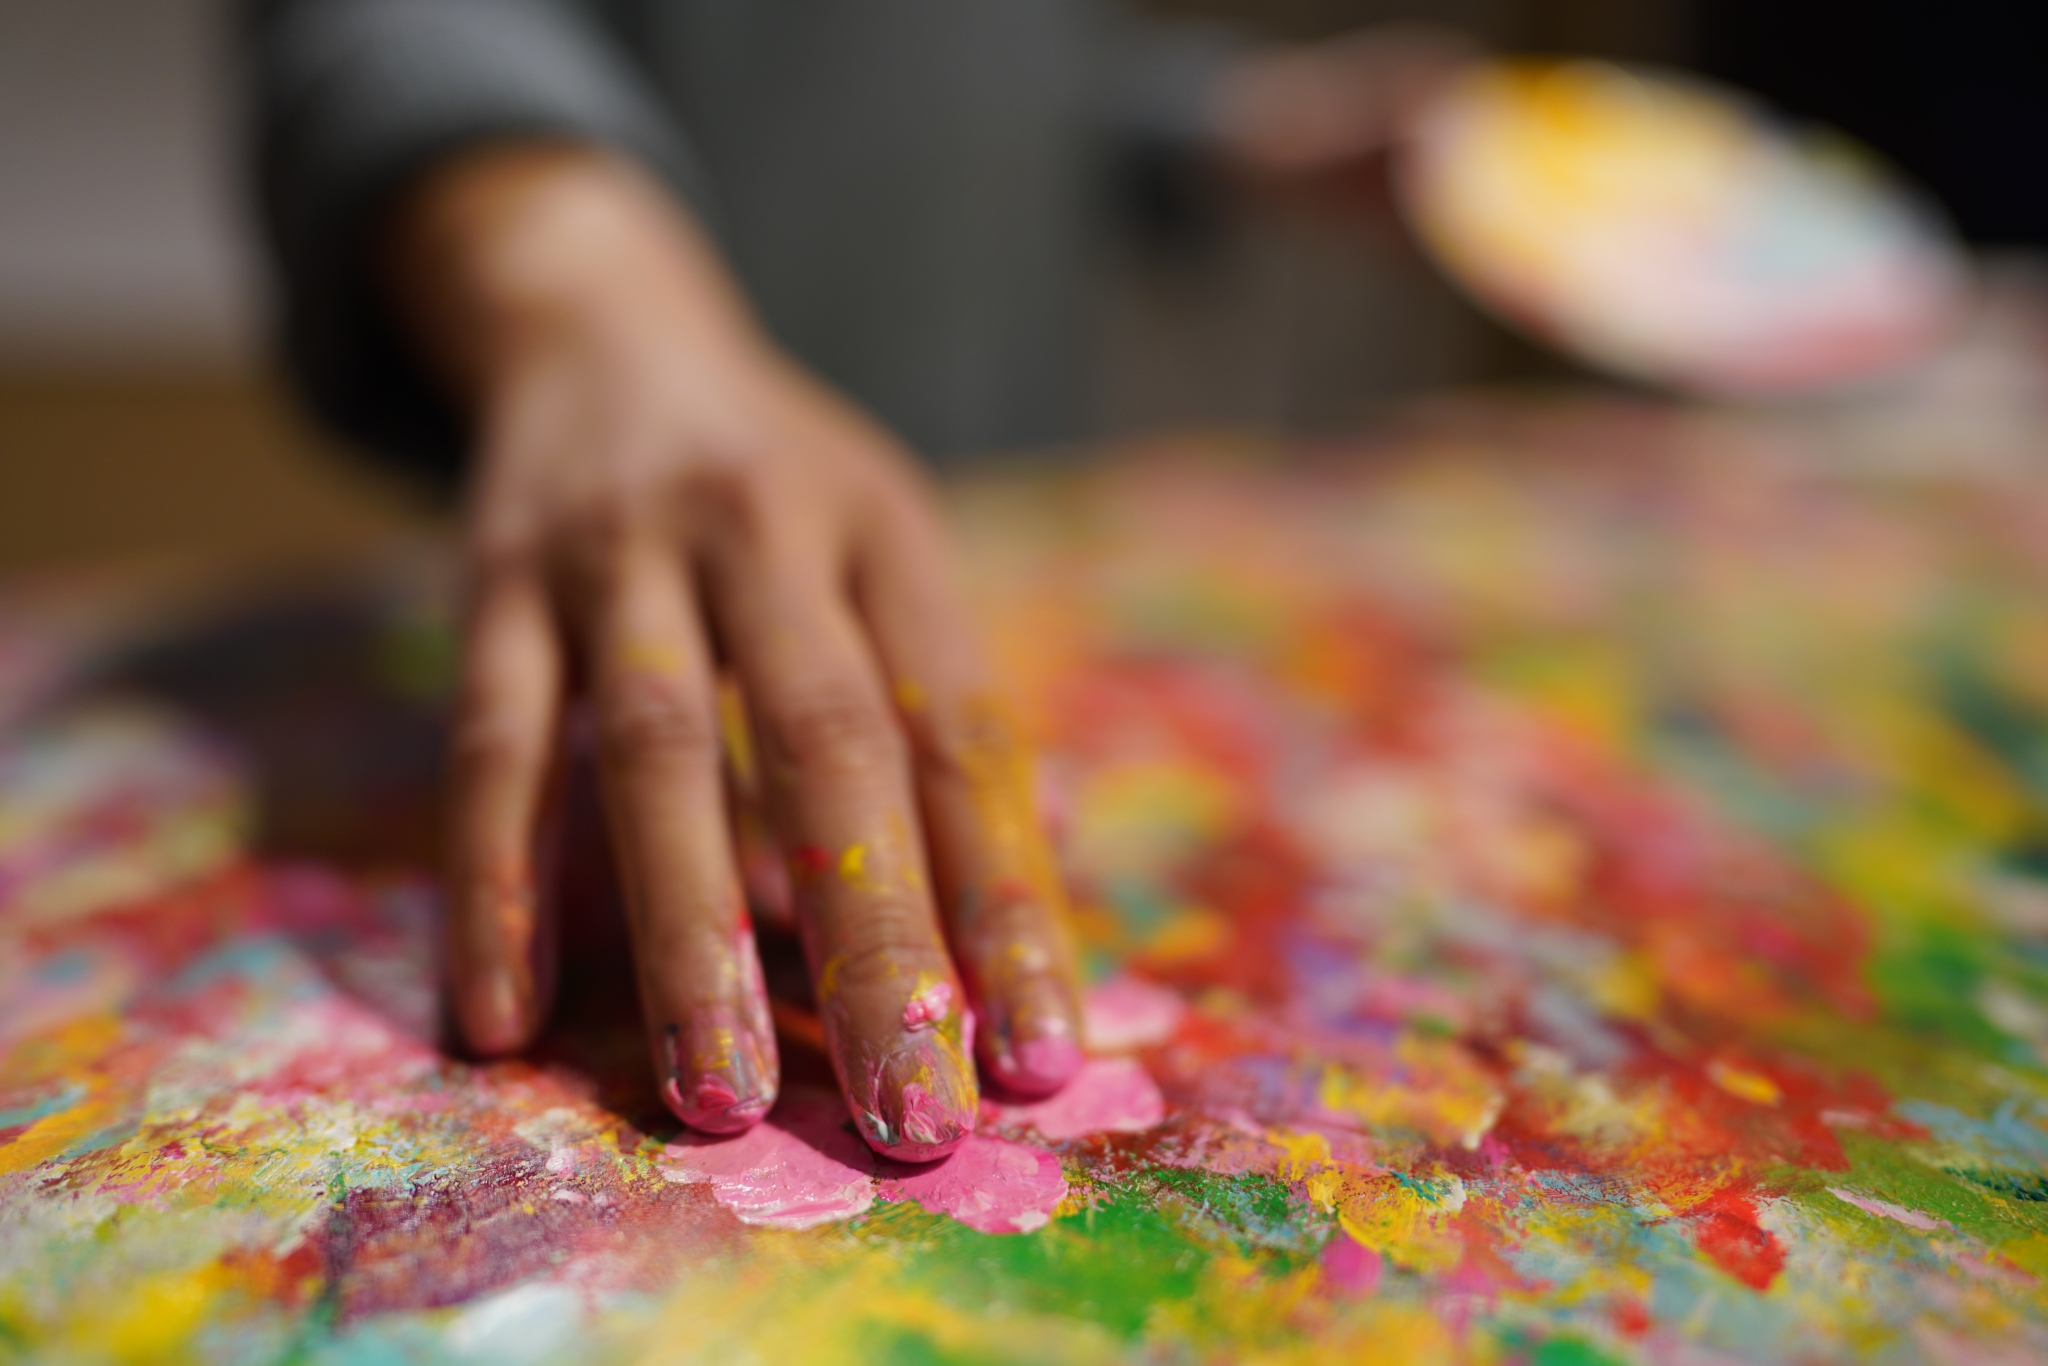 A hand with fingertips covered in paint in foreground